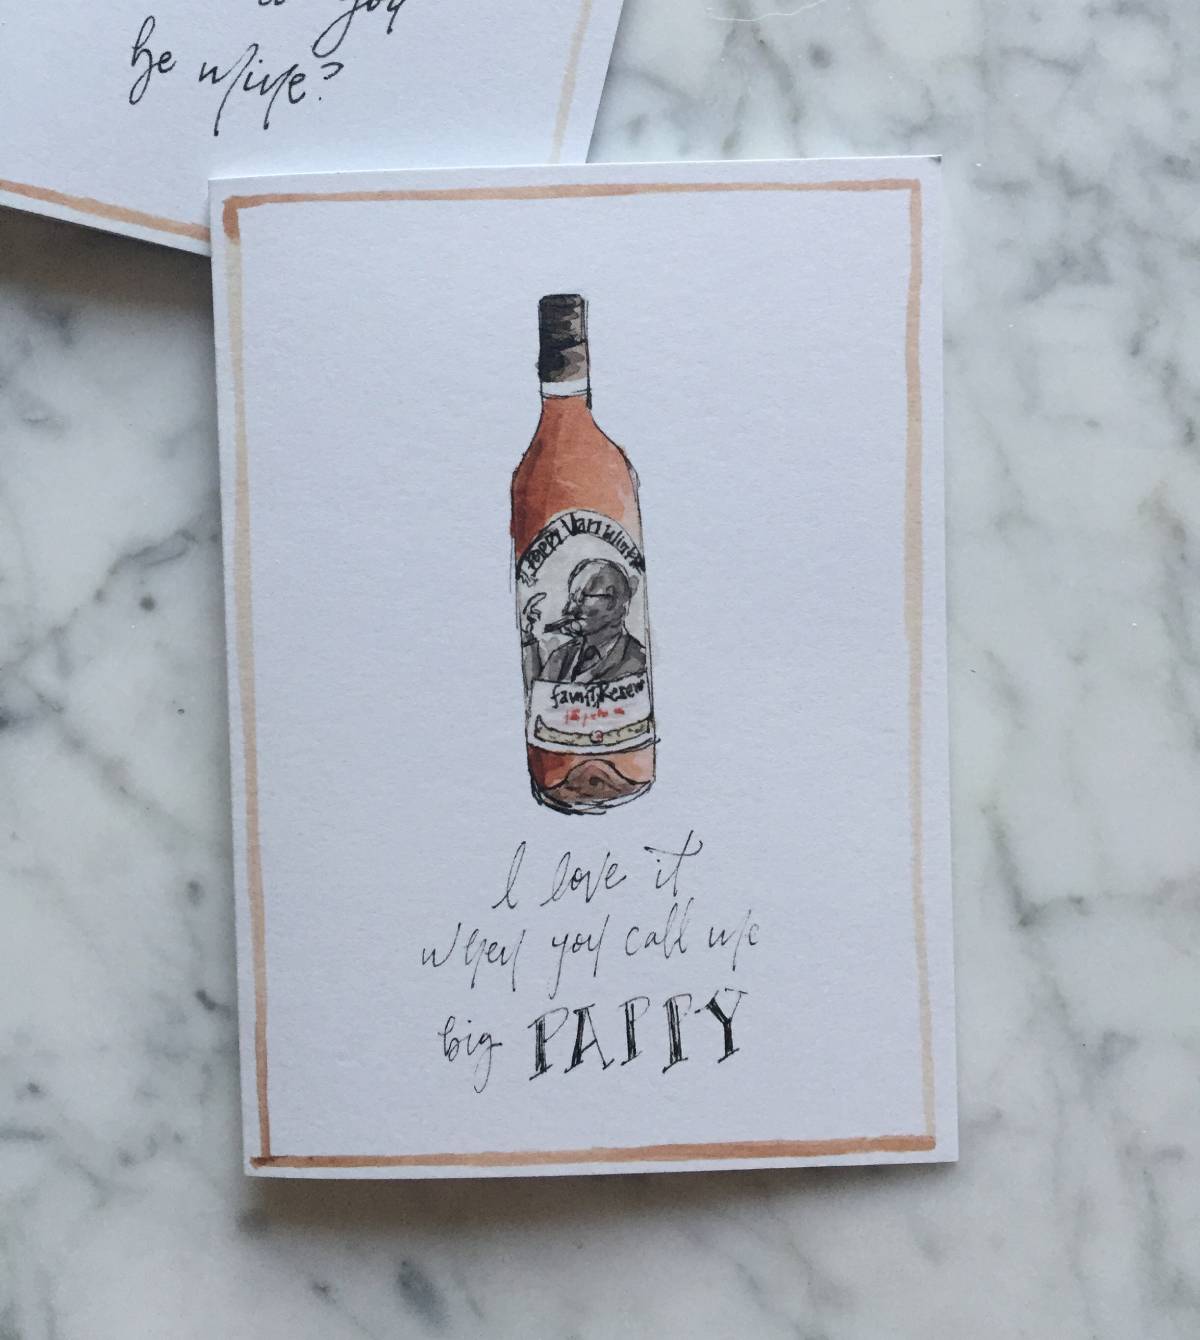 A bourbon Valentine's Day card with a watercolor illustration of a Pappy Van Winkle 25 year bottle and the text "I love it when you call me big pappy"